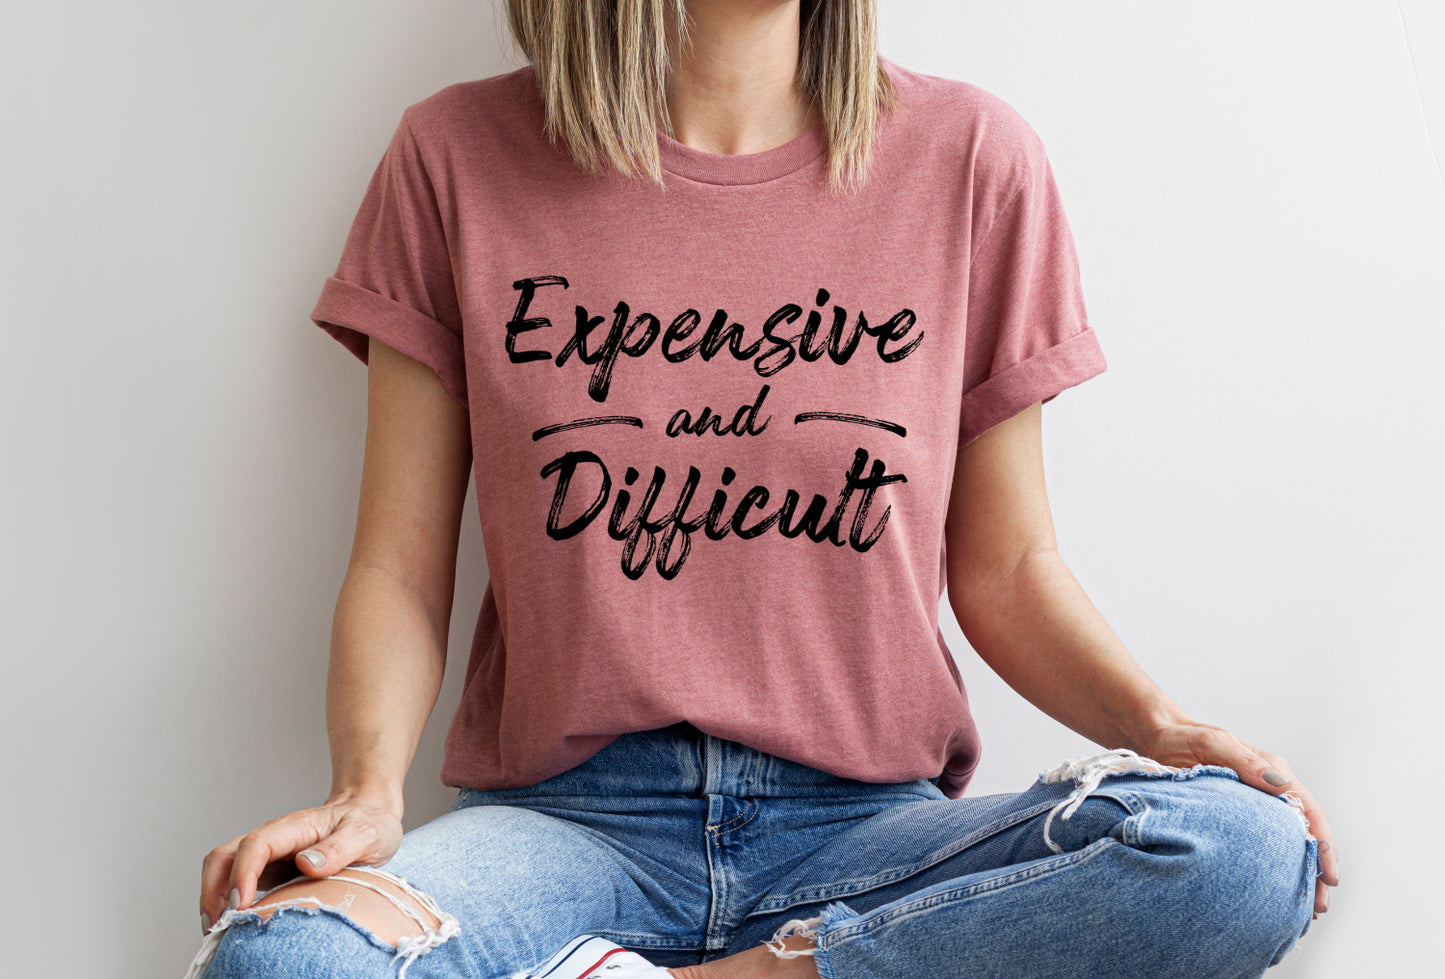 Expensive and Difficult, Funny Mom Wife Tee Women Shirt, Sarcastic Novelty T-shirt Tee